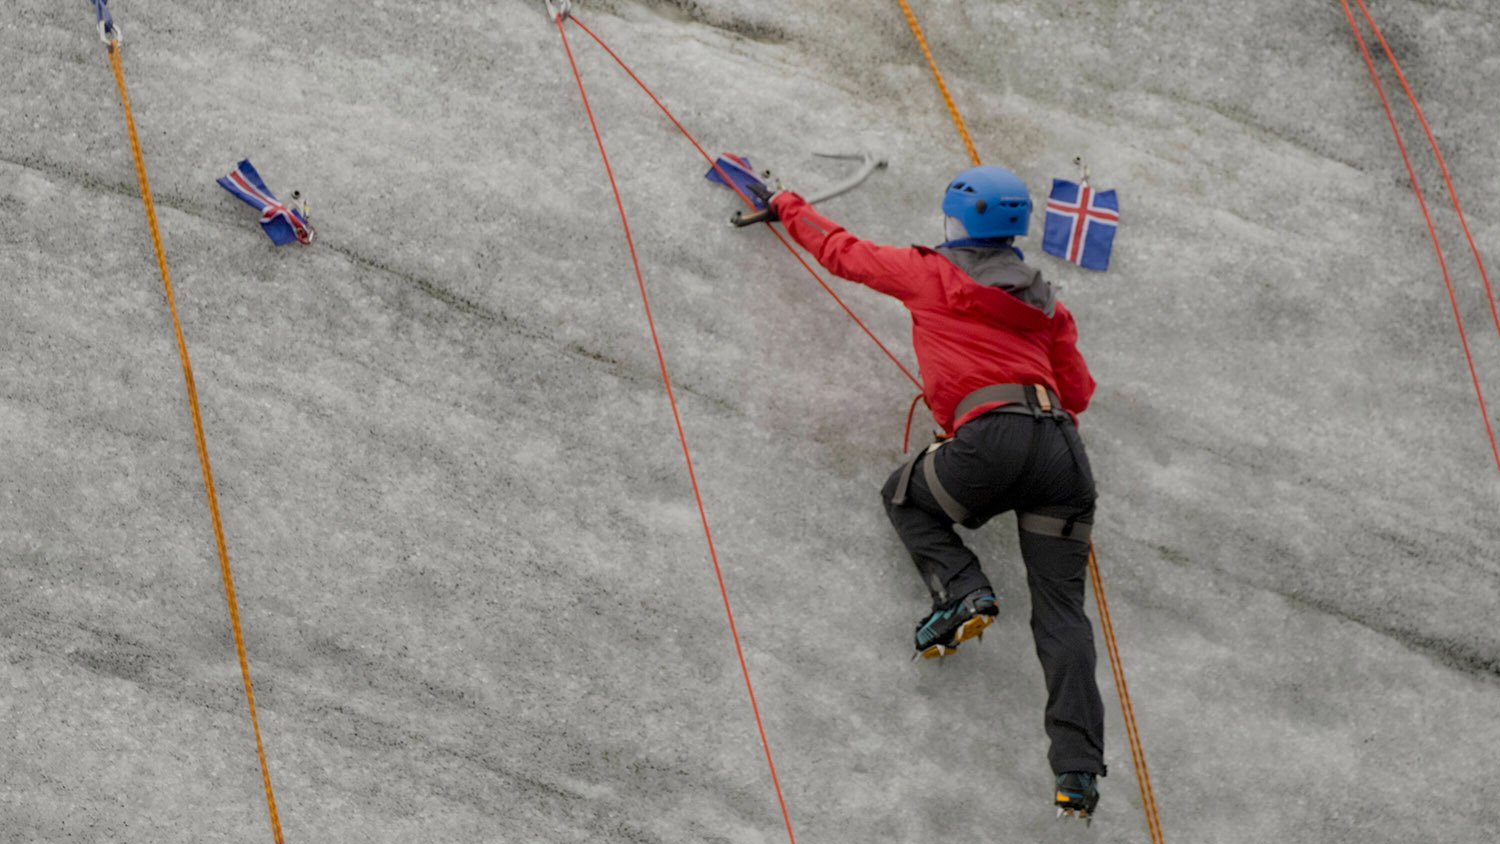 Aubrey Ares scales a glacier in Iceland on The Amazing Race 34 as part of a challenge with her teammate, David Hernandez.